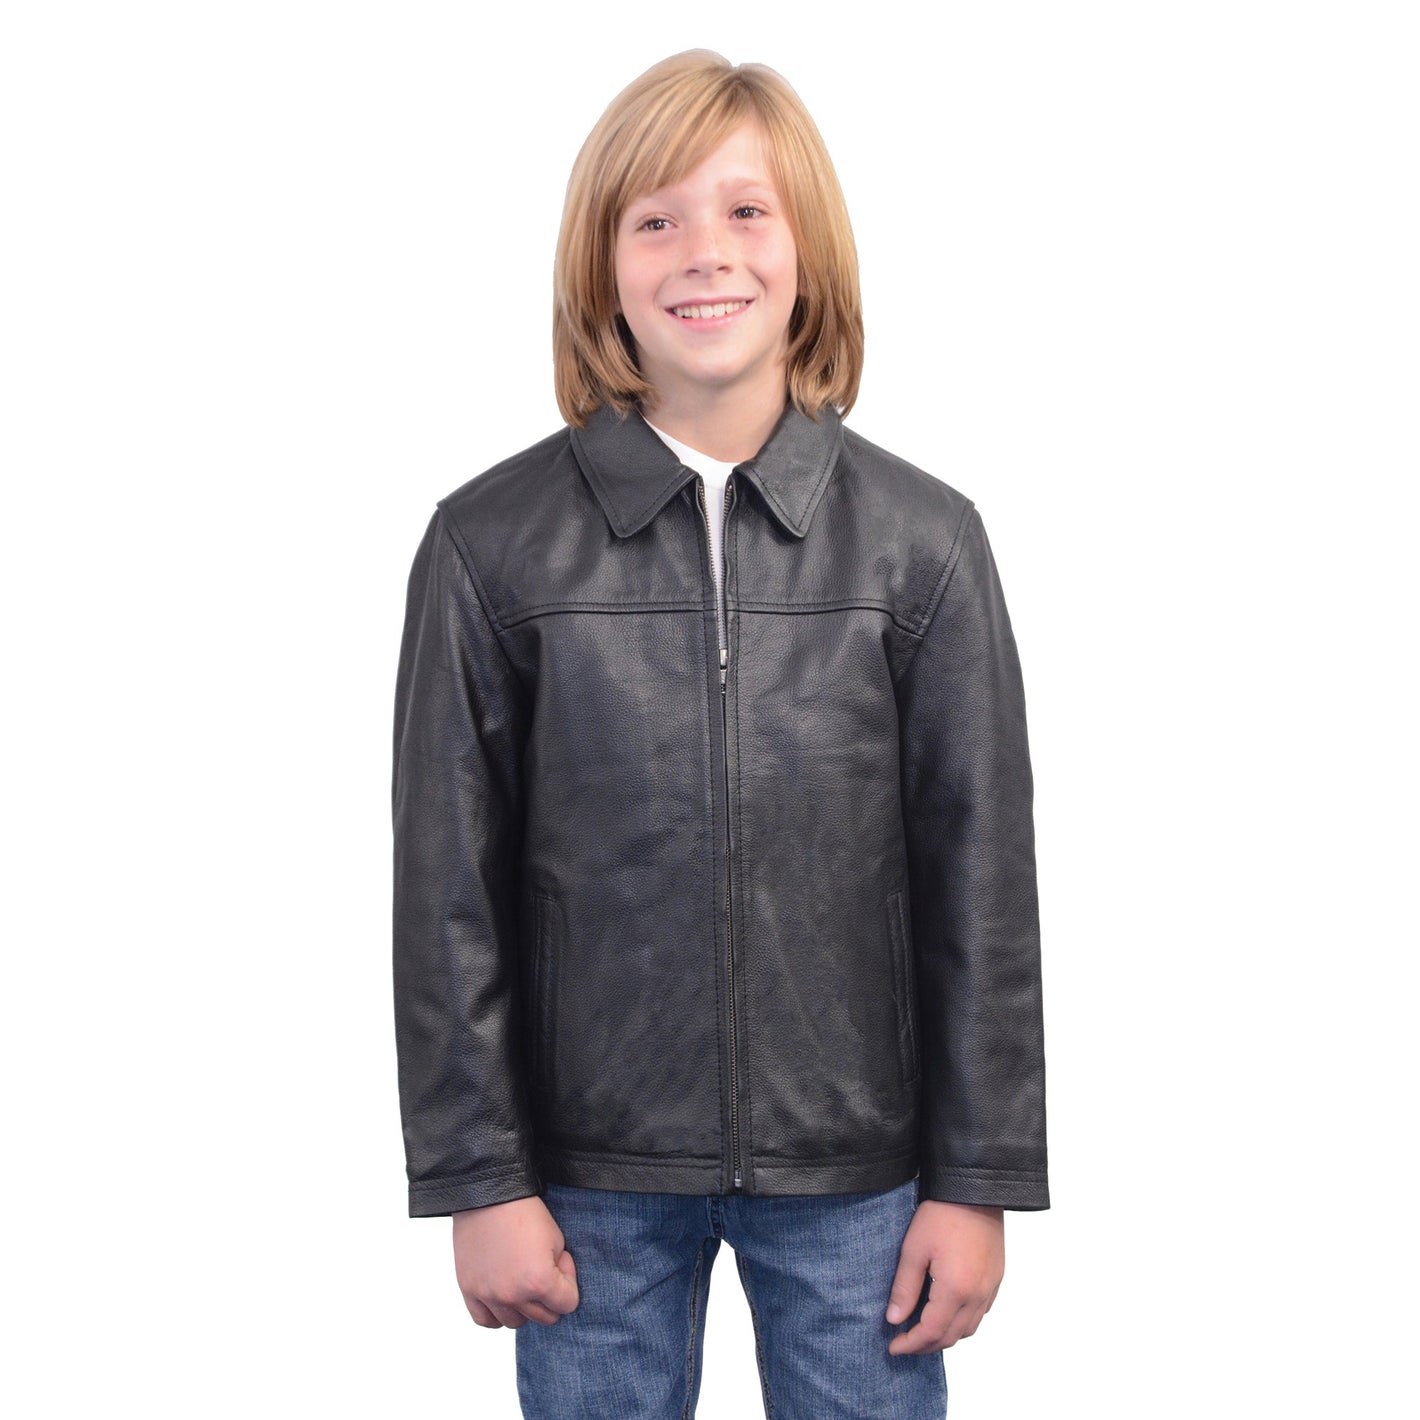 Youth Size Leather JD Zipper Front Jacket